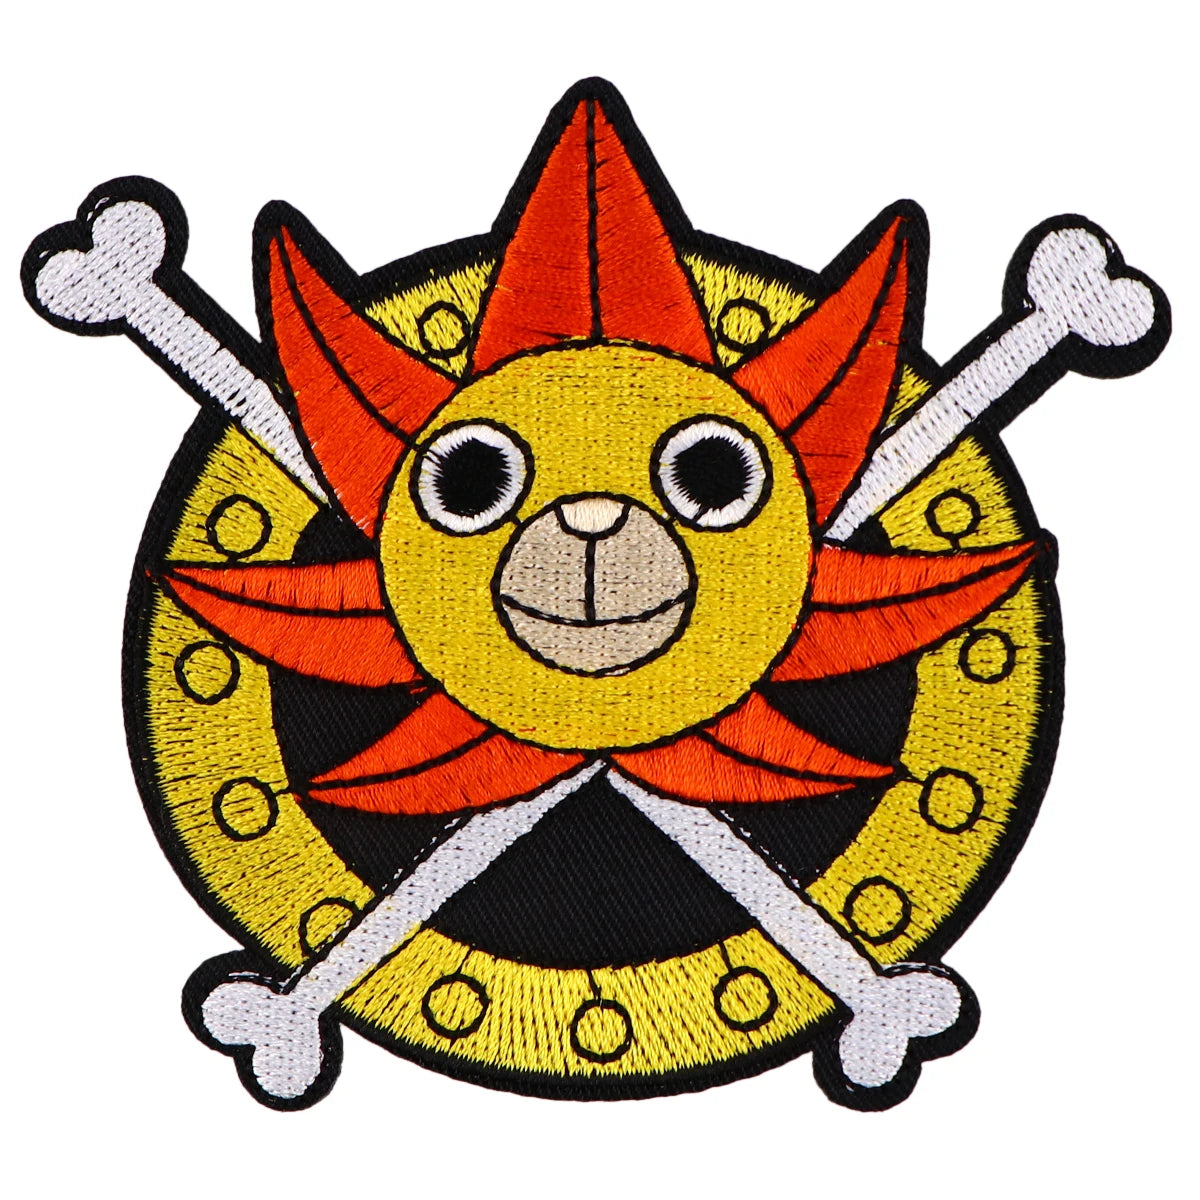 One Piece Anime The Thousand Sunny Pirate Ship Embroidered Iron On Patch